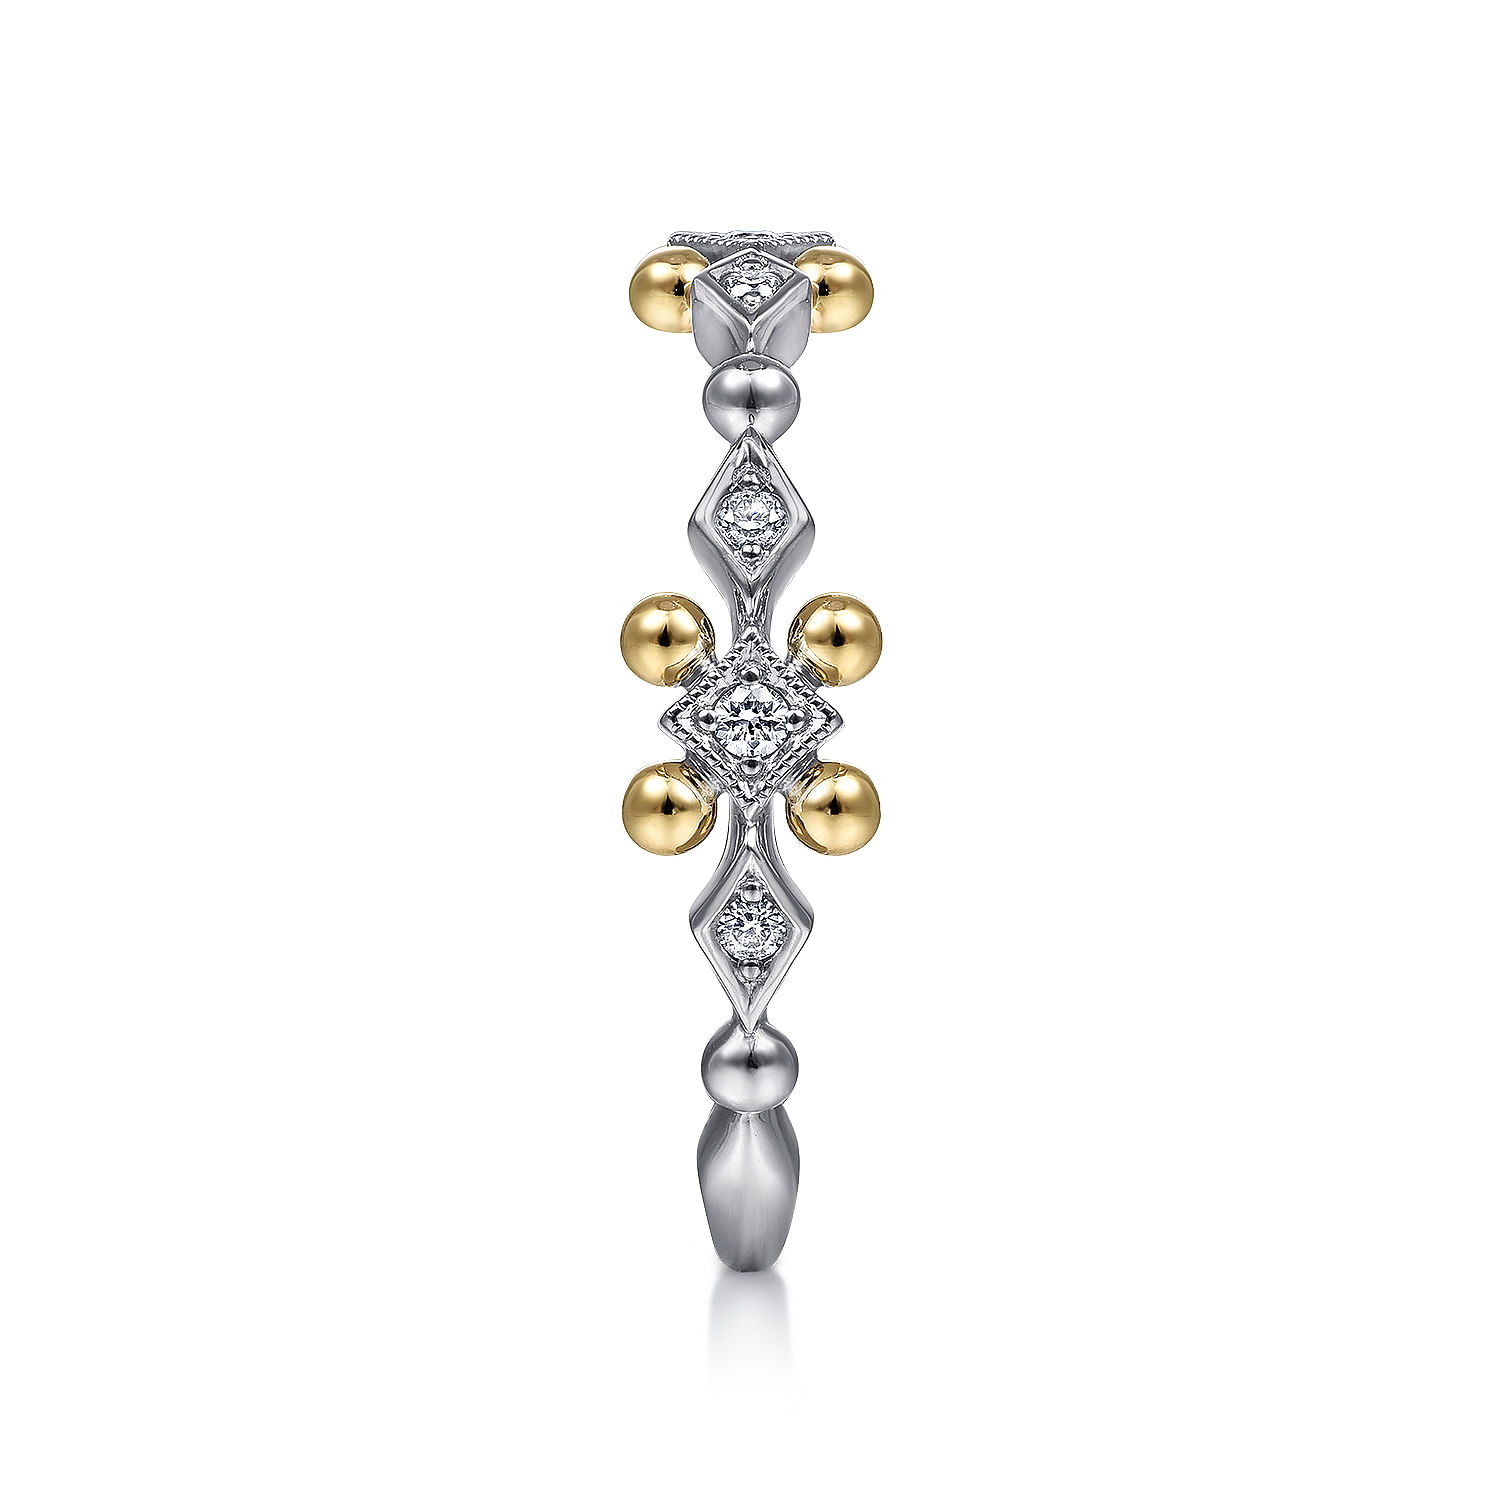 14K Yellow-White Gold Beaded Diamond Stackable Ring